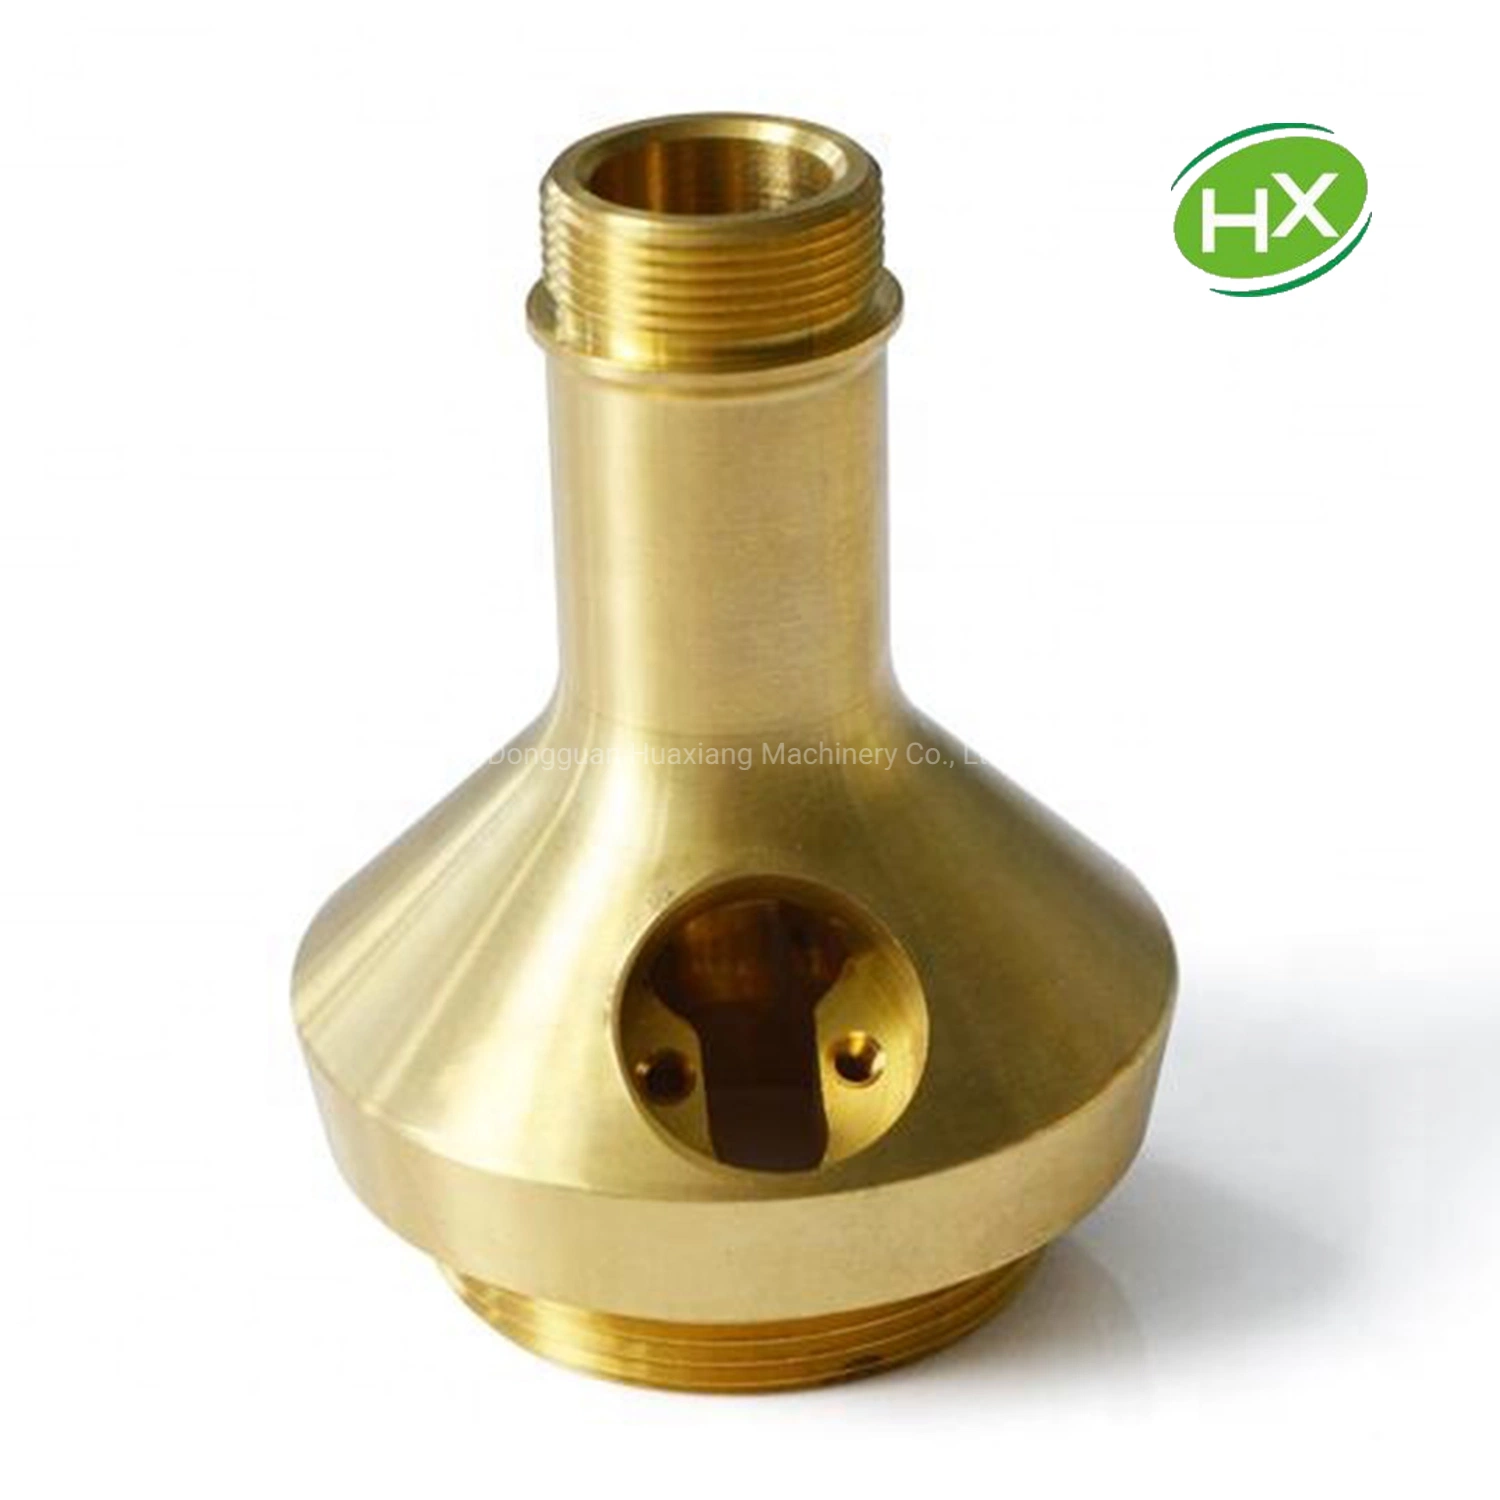 CNC Machine Brass/Copper for Casting Motorcycle Parts/Auto Accessories